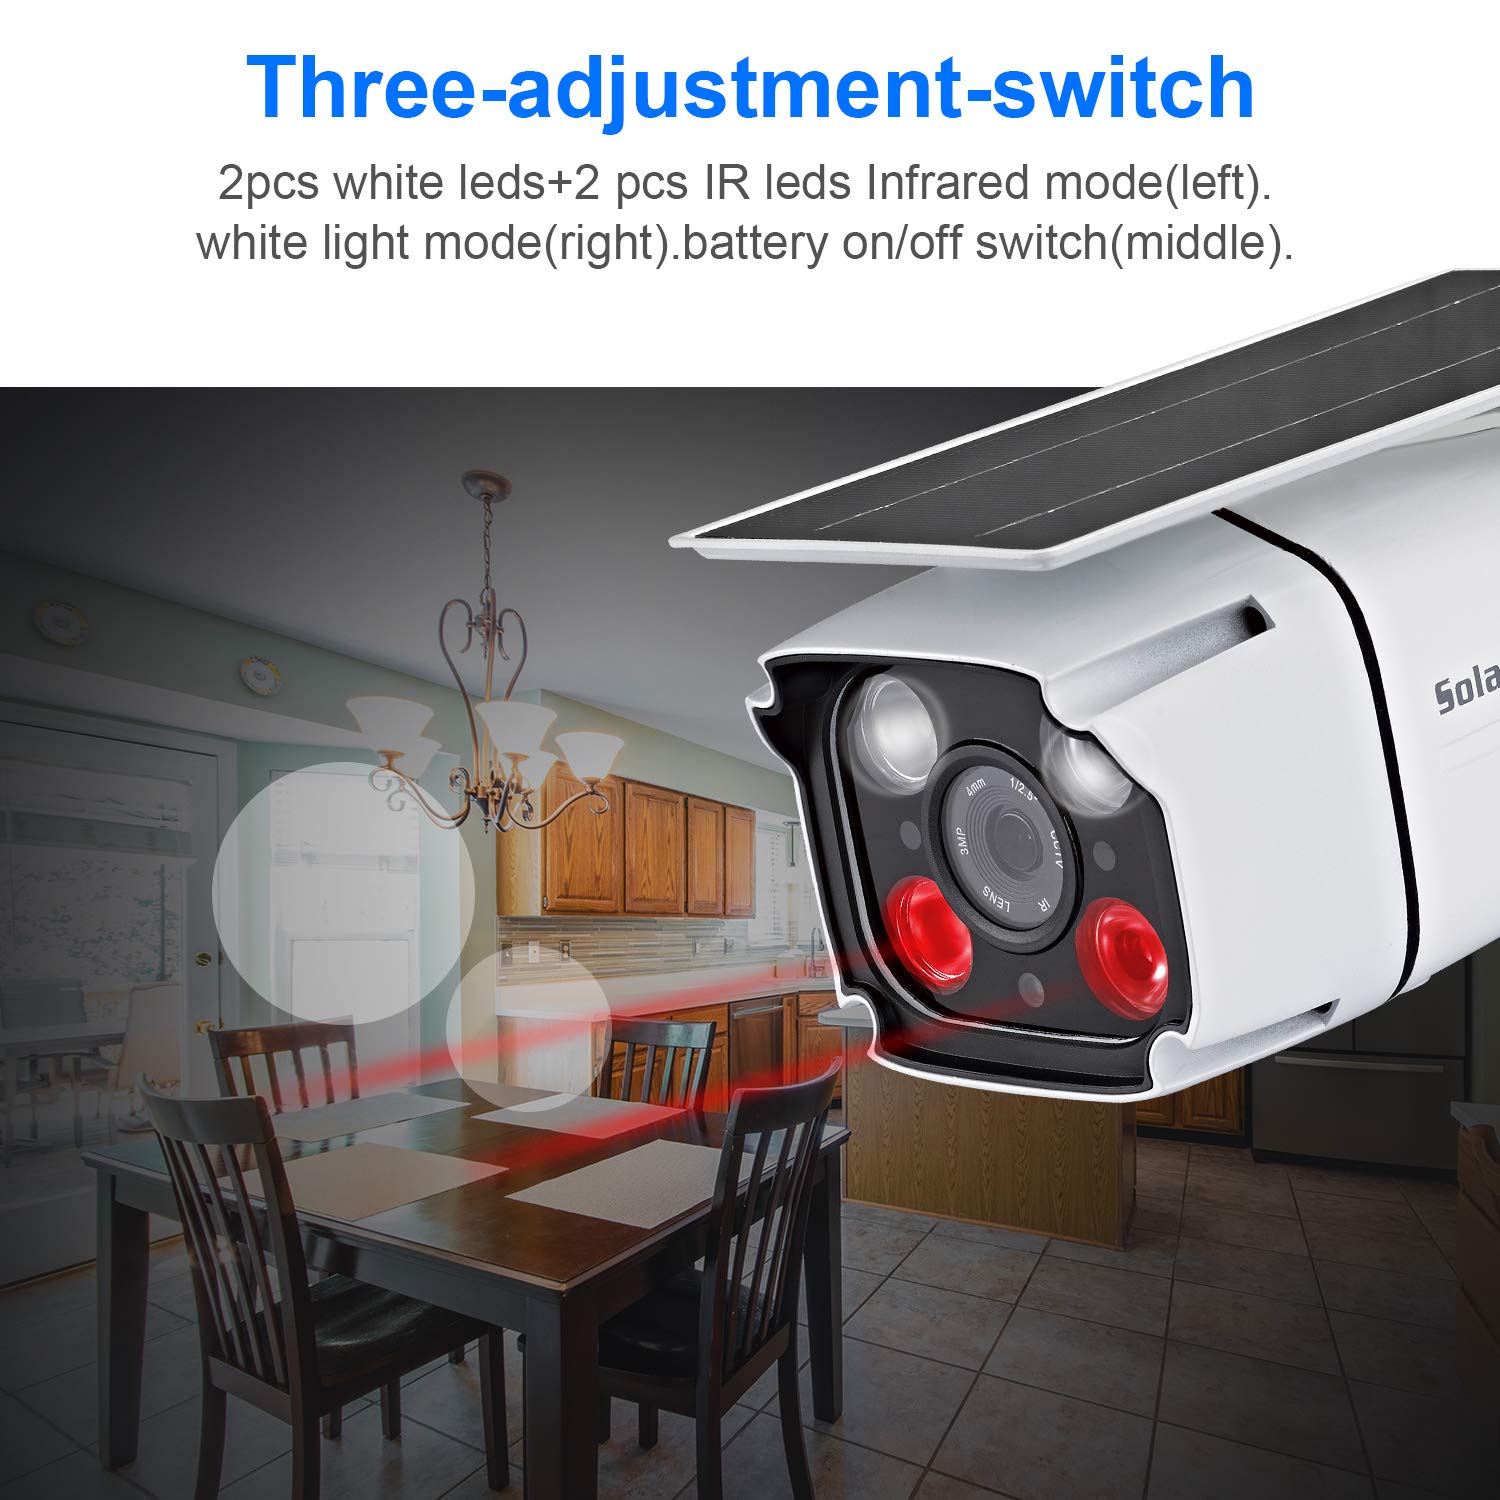 Solar Powered Wireless Security Camera-2.4Ghz WiFi IP Solar CCTV Camera Built in Rechargeable Battery, SD Card Storage, IP67 Waterproof, Remote APP, PIR Sensor,for Outdoor Smart Home Security Camera